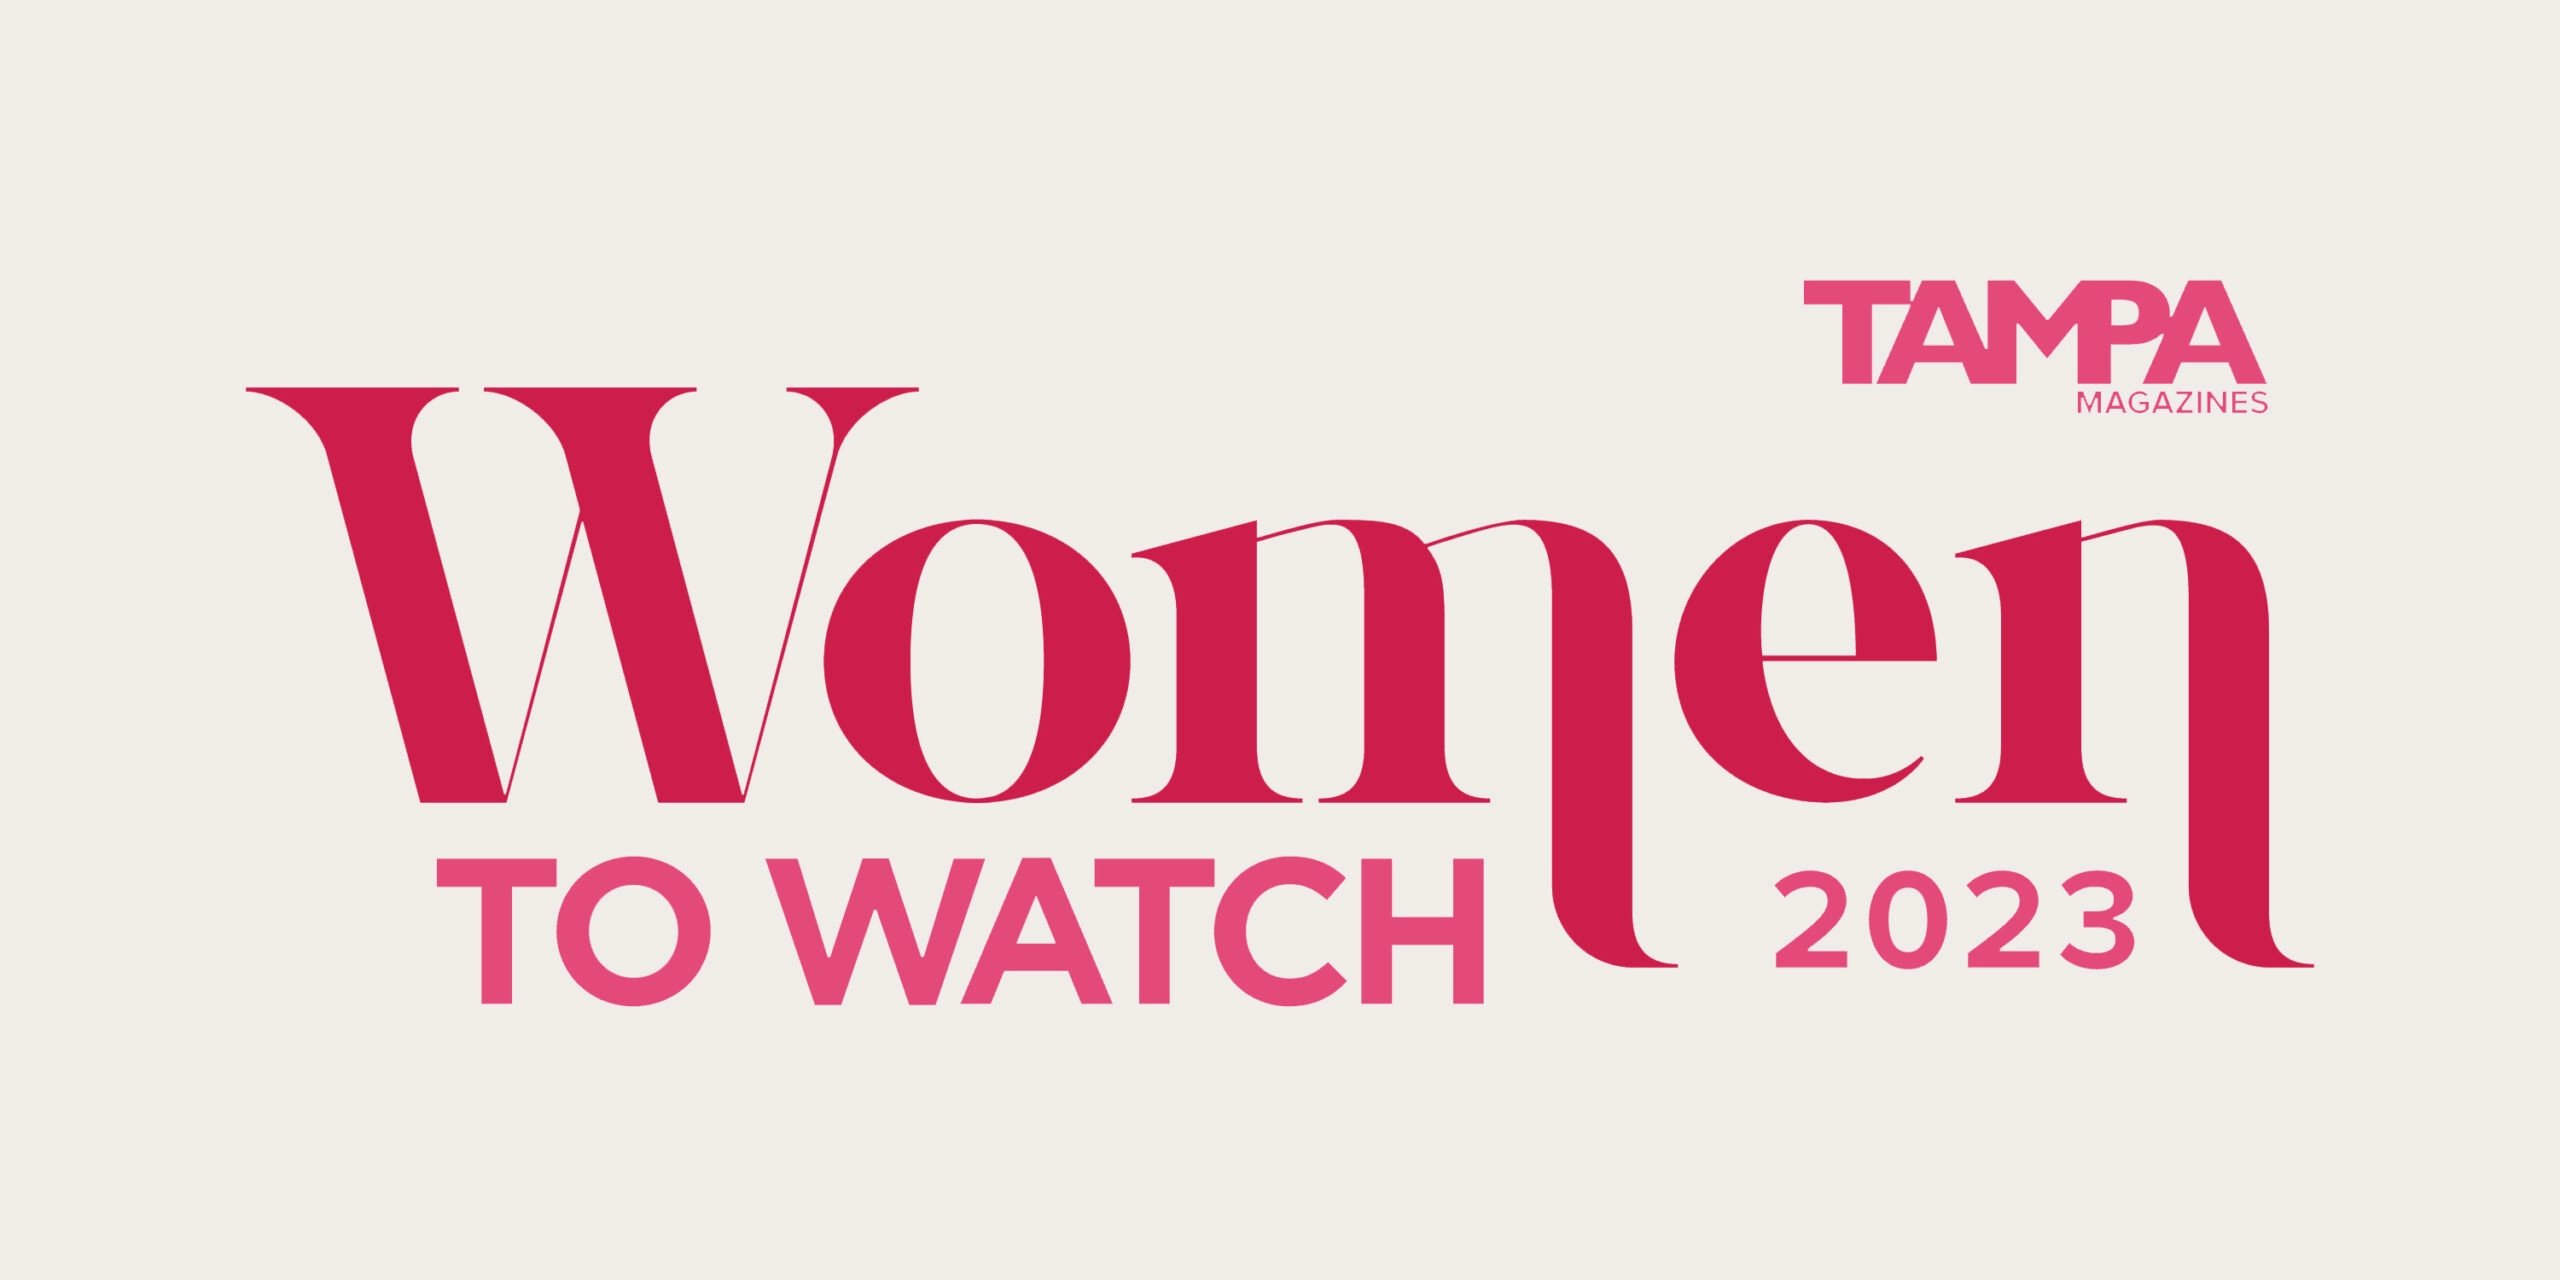 bŏdze CEO, Nisreen Fernandez, named Tampa Magazine’s Woman to Watch for 2023